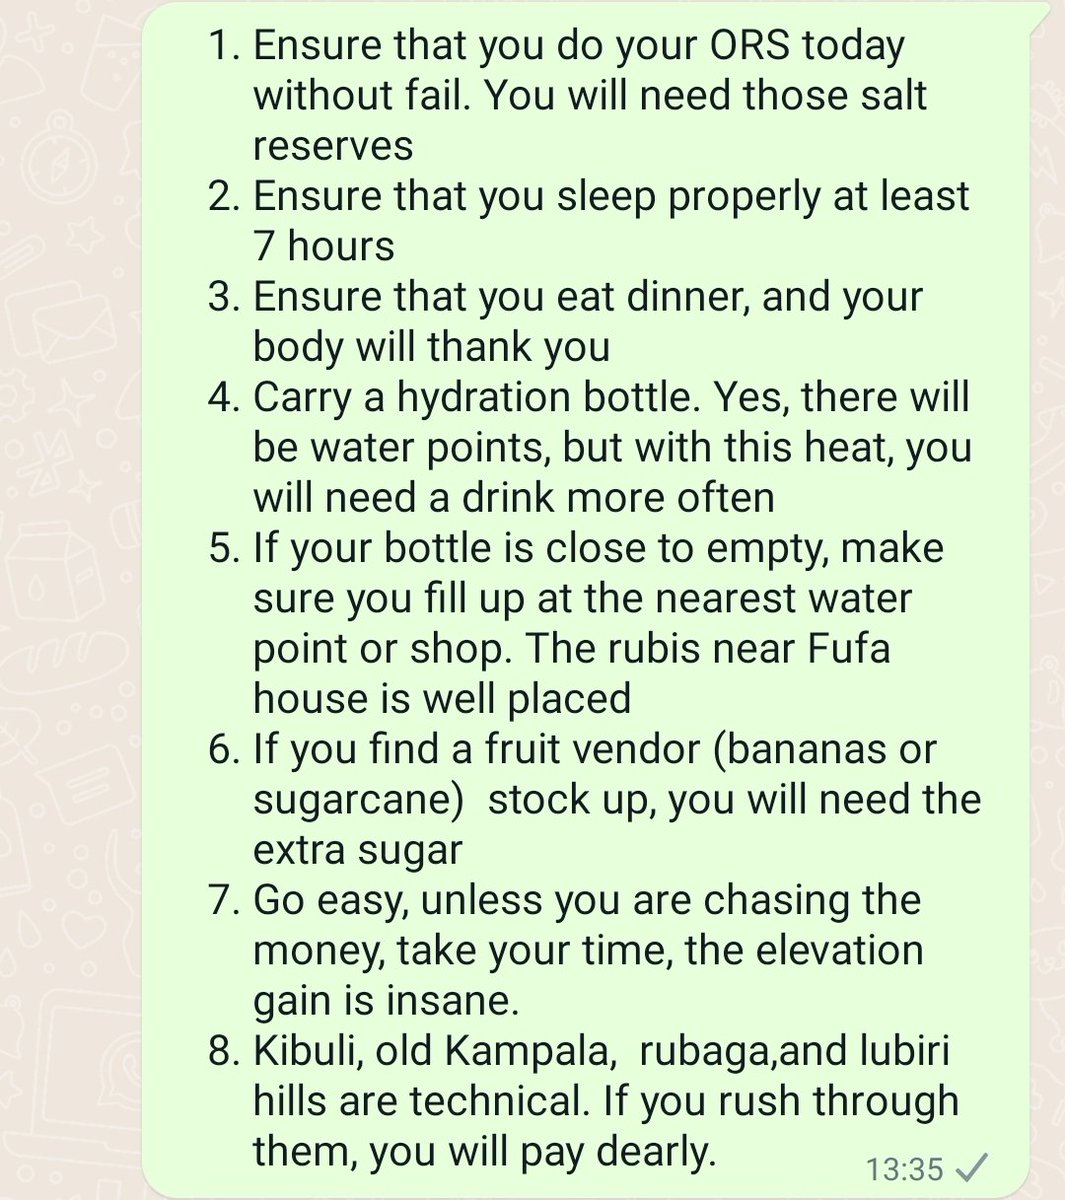 @rkabushenga @niyimic @MosesRutahigwa @KawanguziShakur I have just done the 7 hills in this heat. Below are a few tips and byoa bikole but Ensure that you are off the road by 10am.